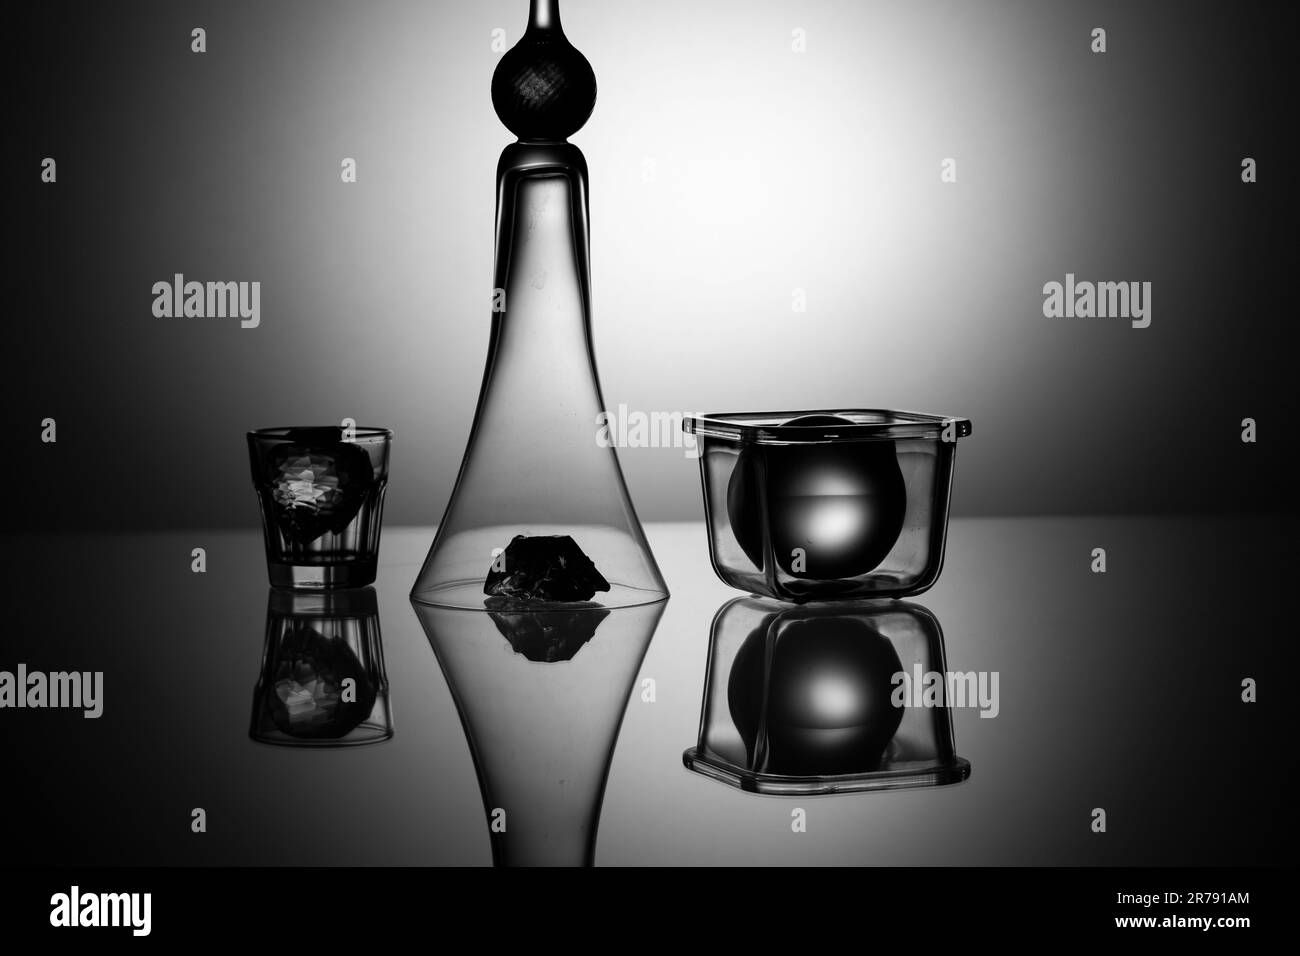 An abstract compositions of glass objects with reflections Stock Photo